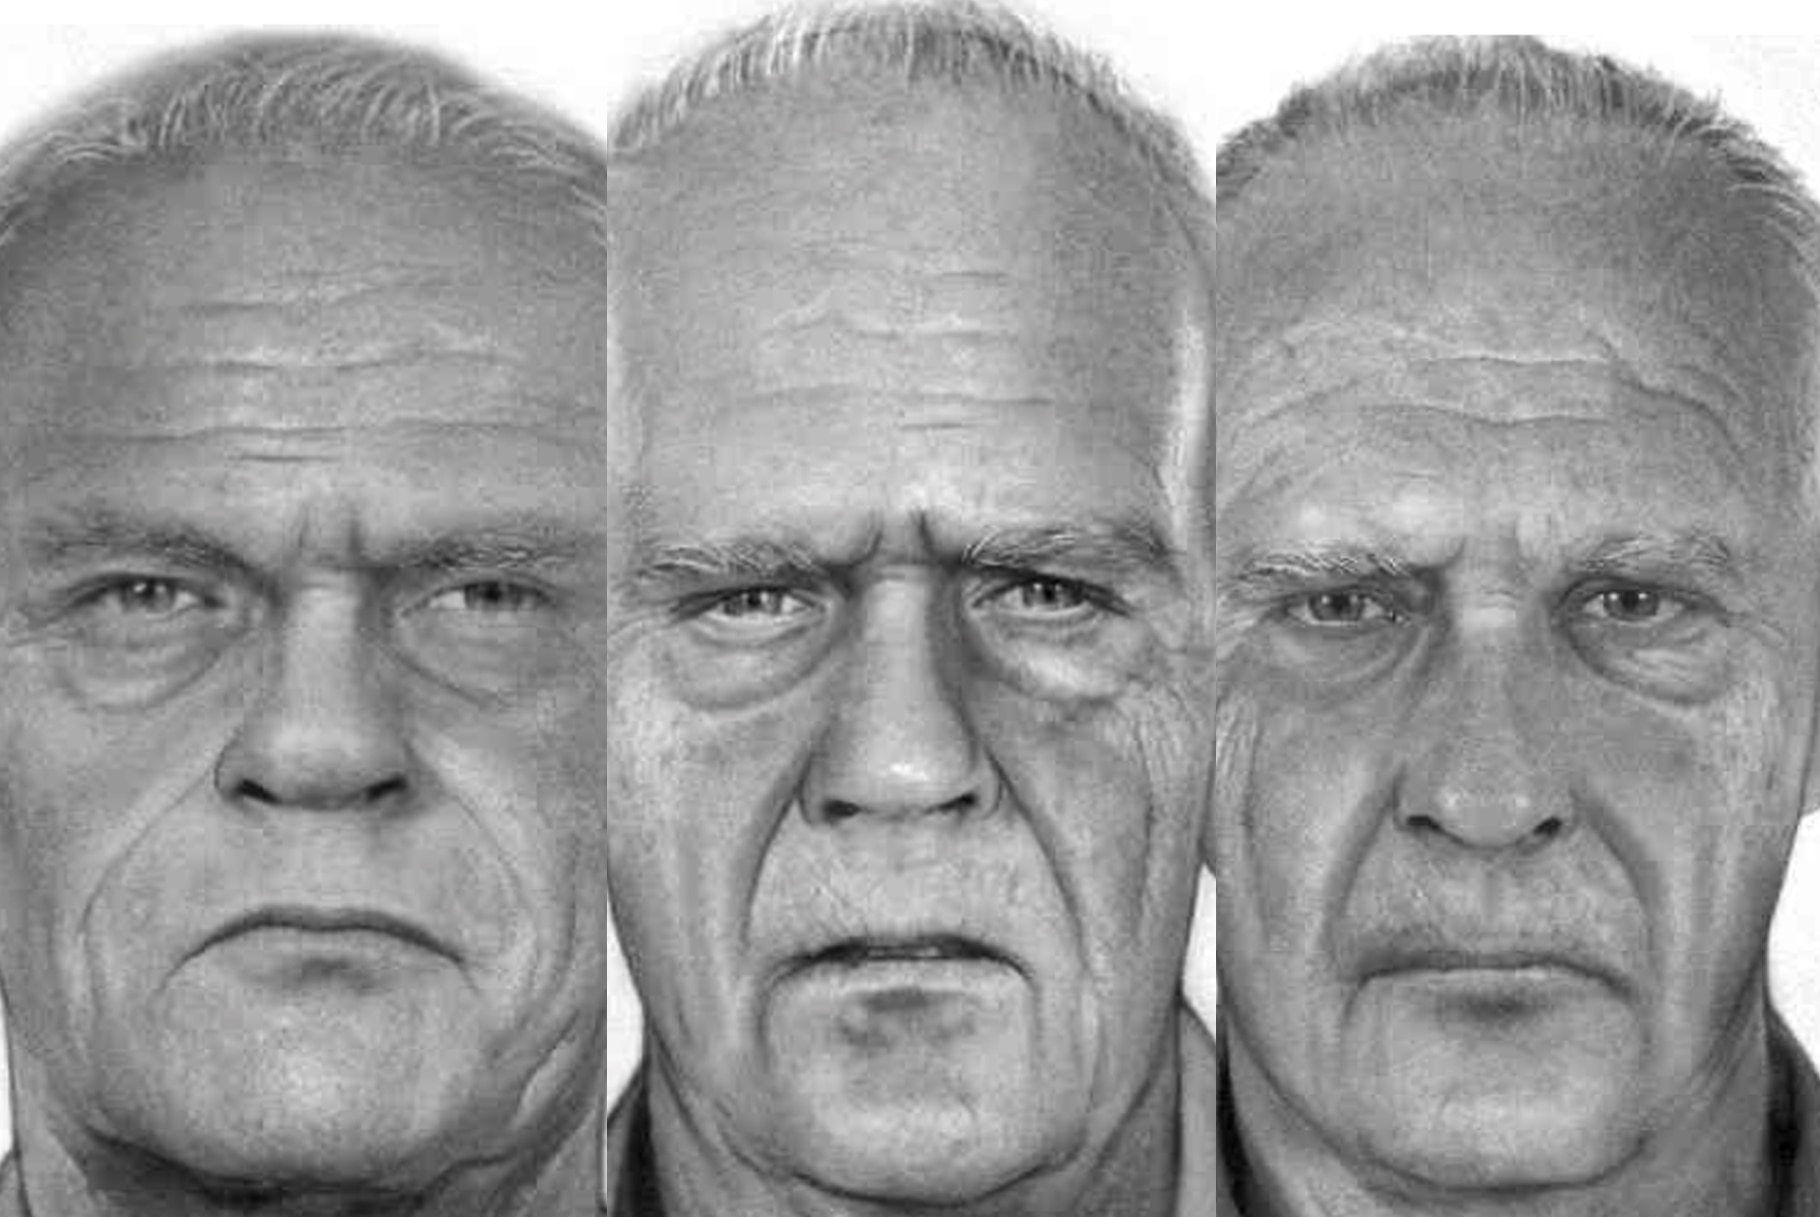 age-progressed photos of escaped inmates Frank Morris, John and Clarence Anglin